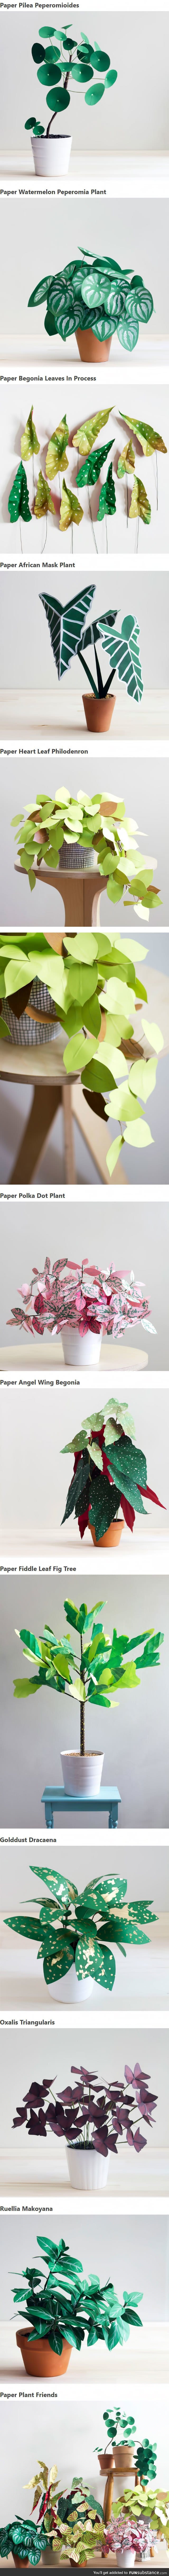 Artist Makes Reliastic Plants With Paper For People Who Can't Grow Them